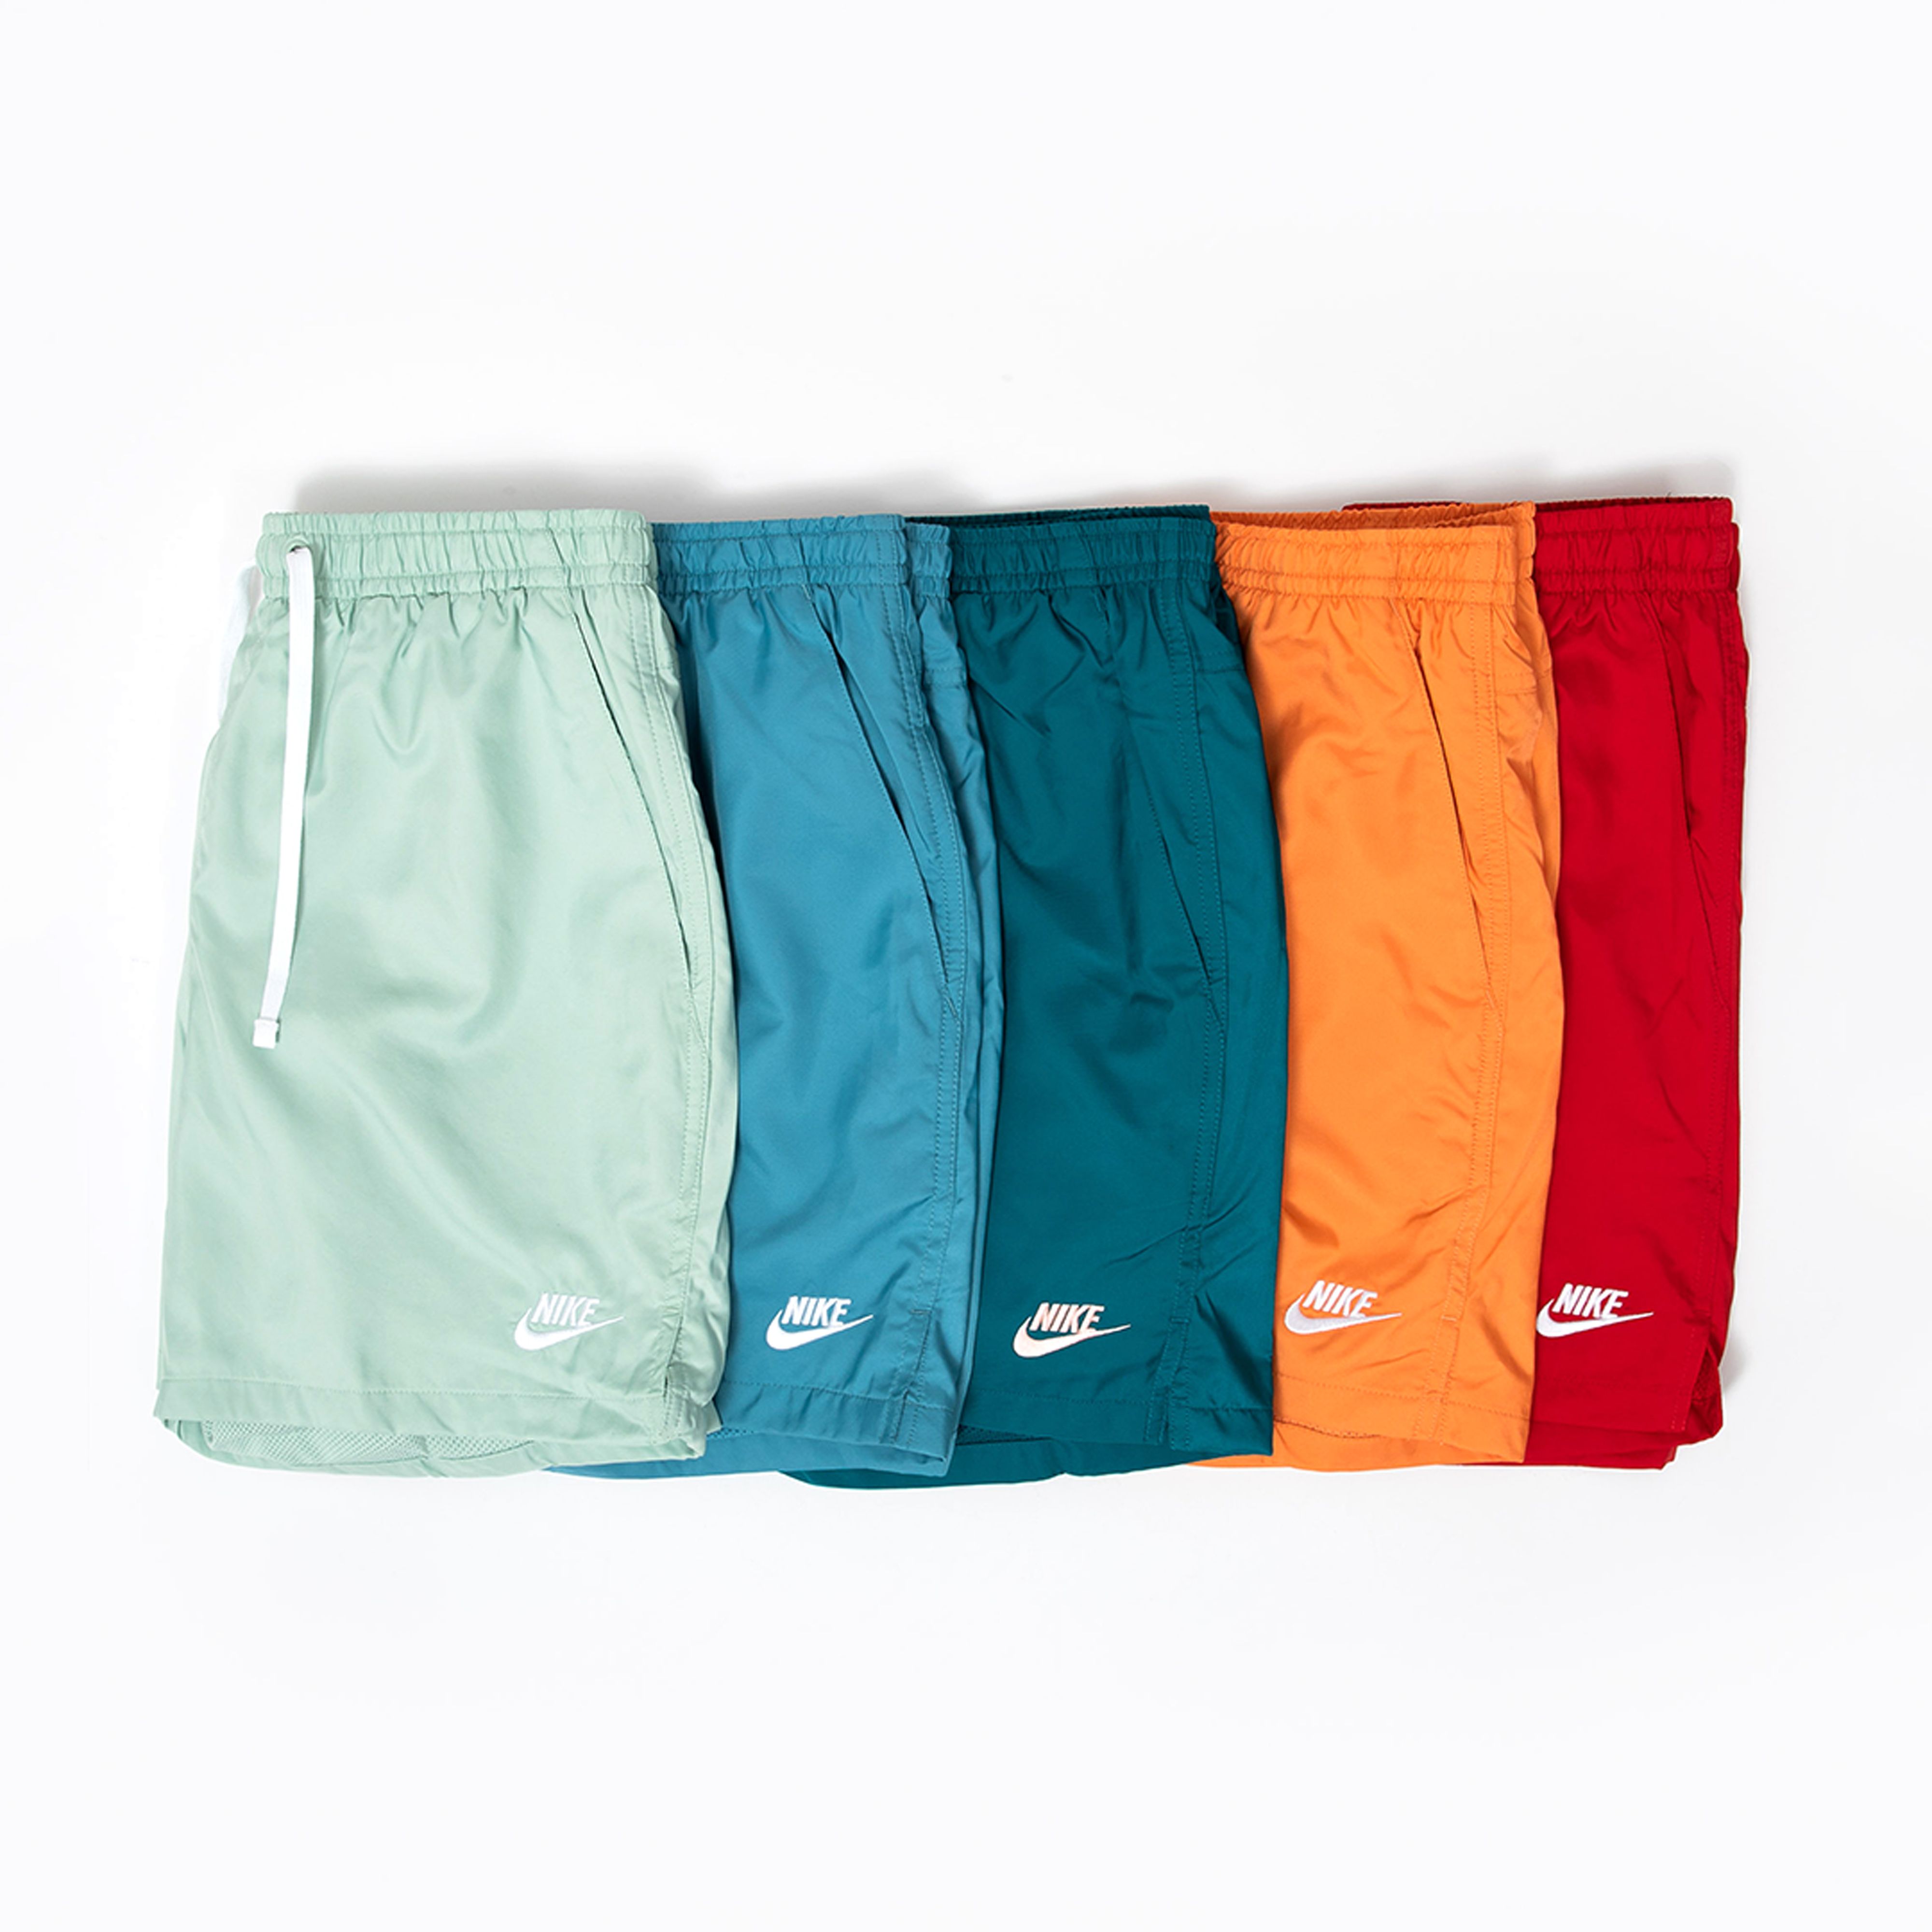 Titolo on X: new colors 🎨 Woven Shorts by Nike Sportswear